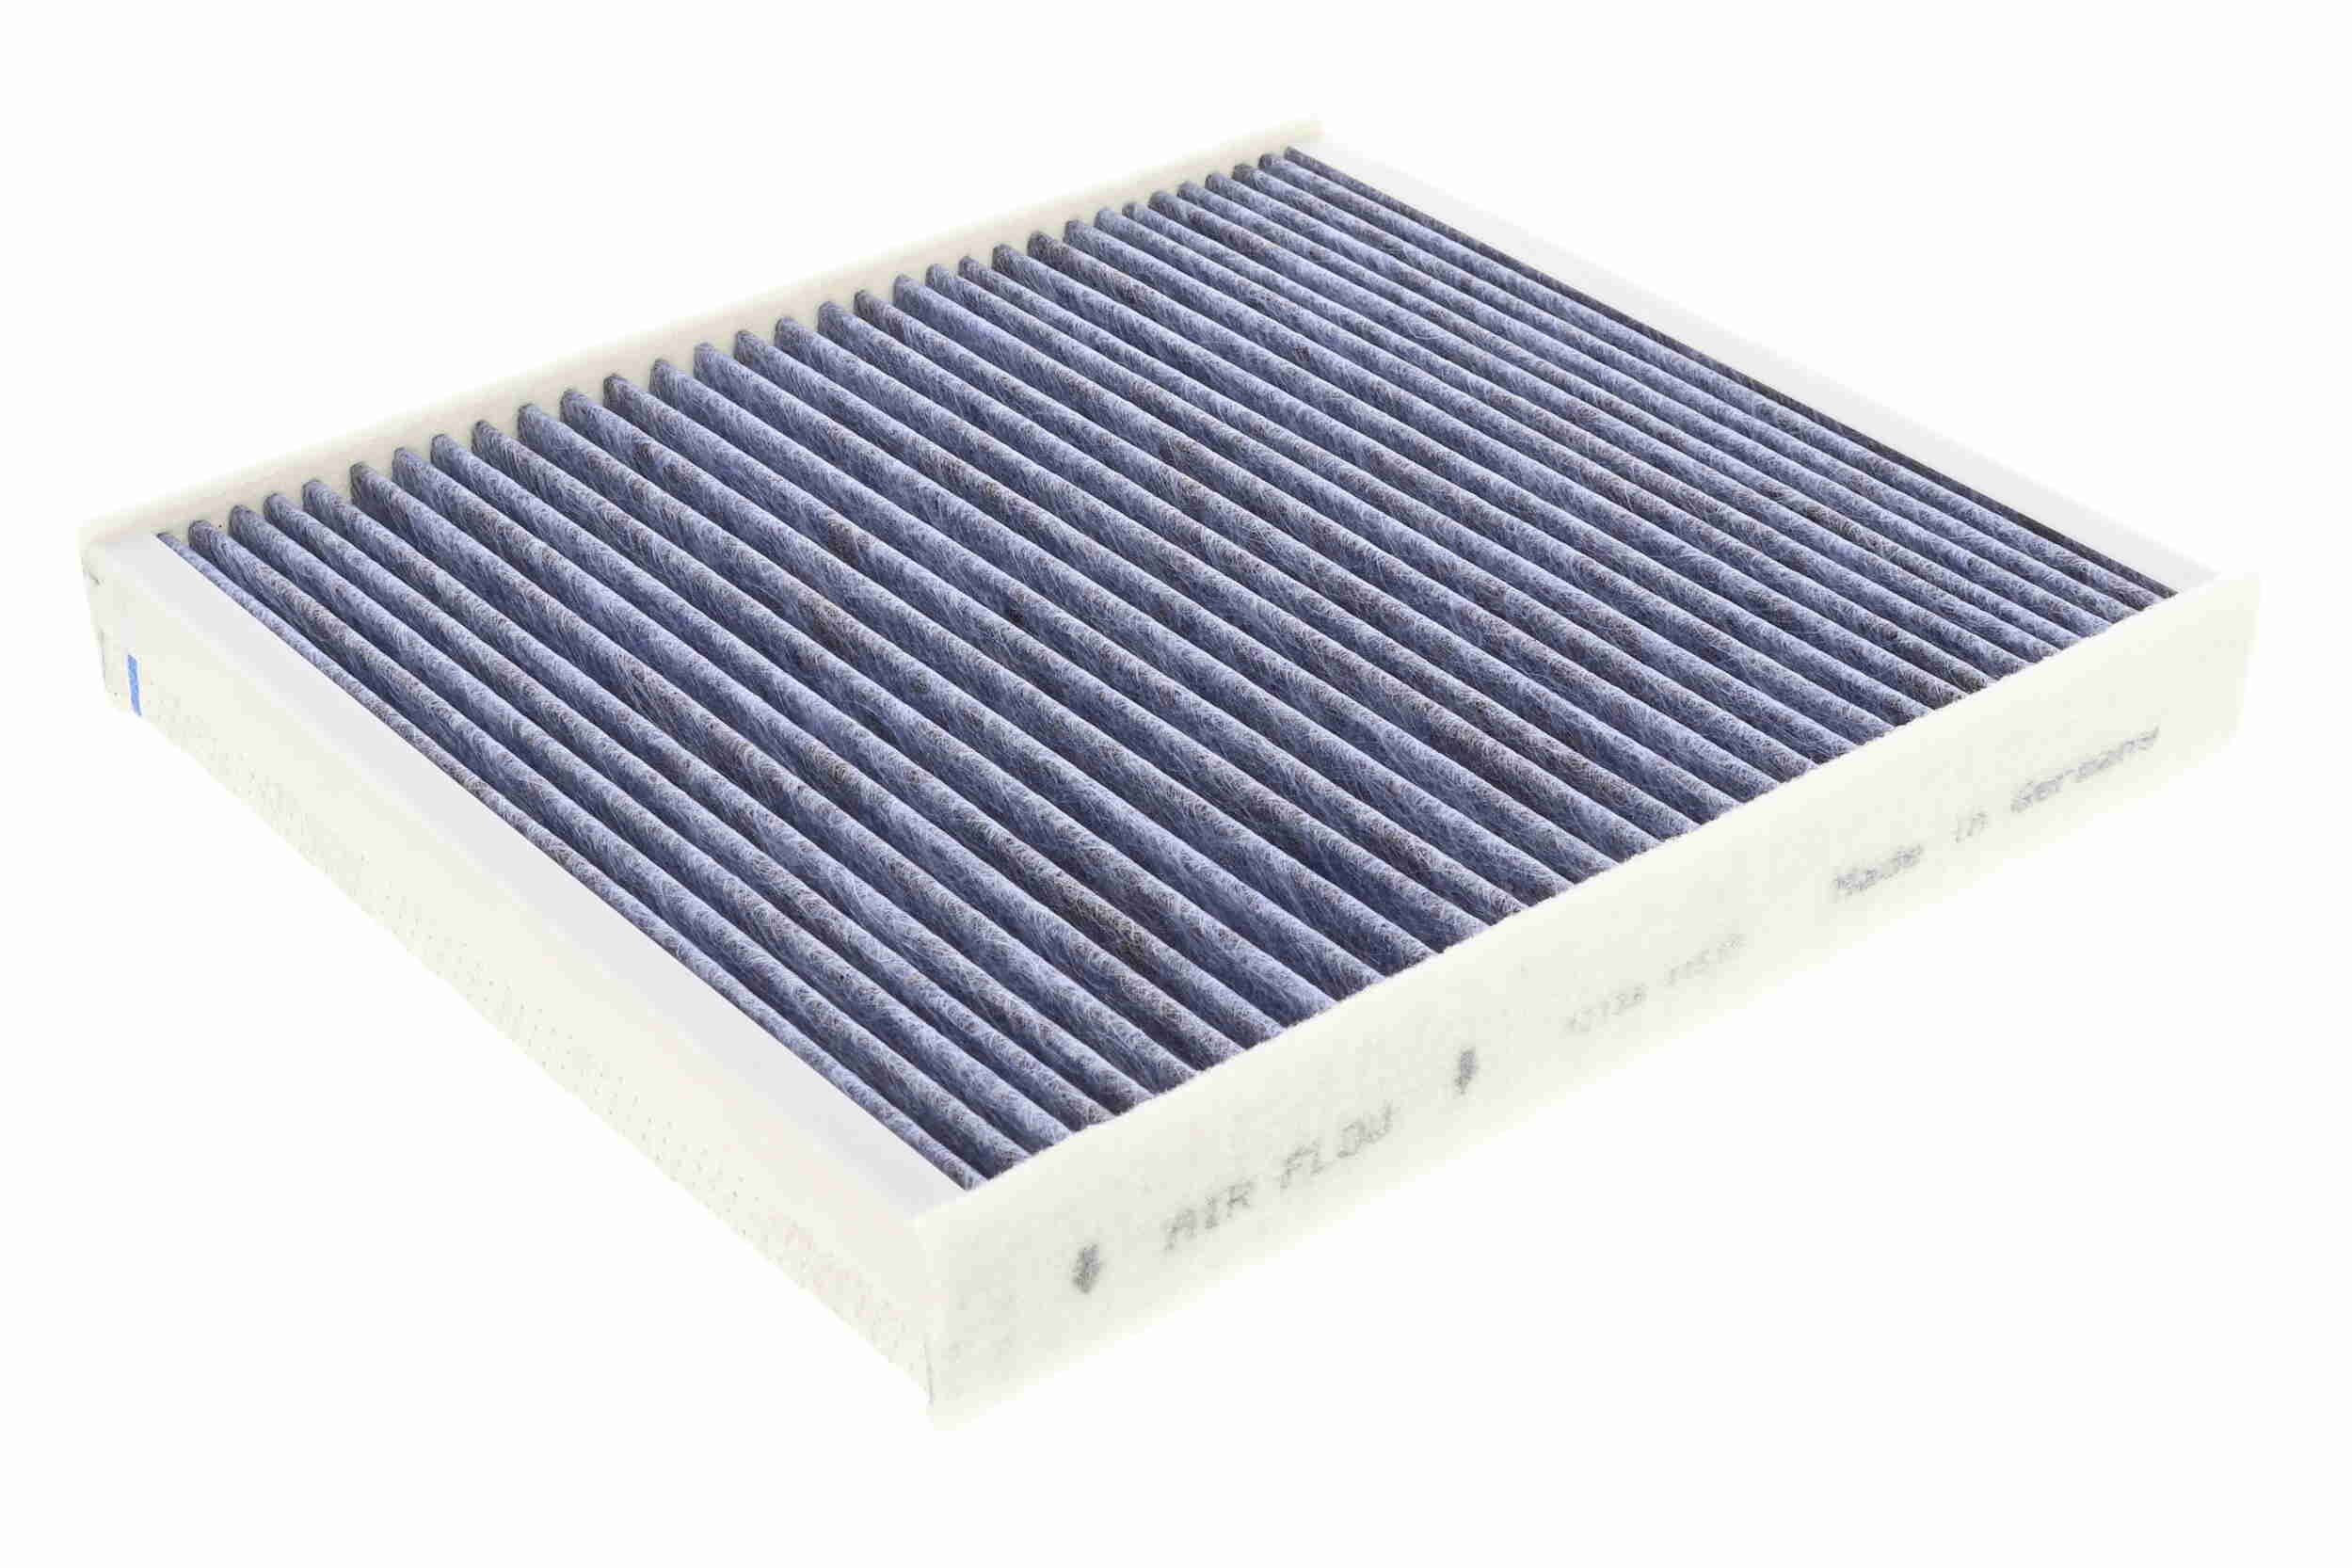 VEMO V10-32-0007 Pollen filter bio-functional cabin air filter, with antibacterial action, with fungicidal effect, Particulate filter (PM 2.5), with anti-allergic effect, with Odour Absorbent Effect, 252 mm x 224 mm x 36 mm, Activated Carbon